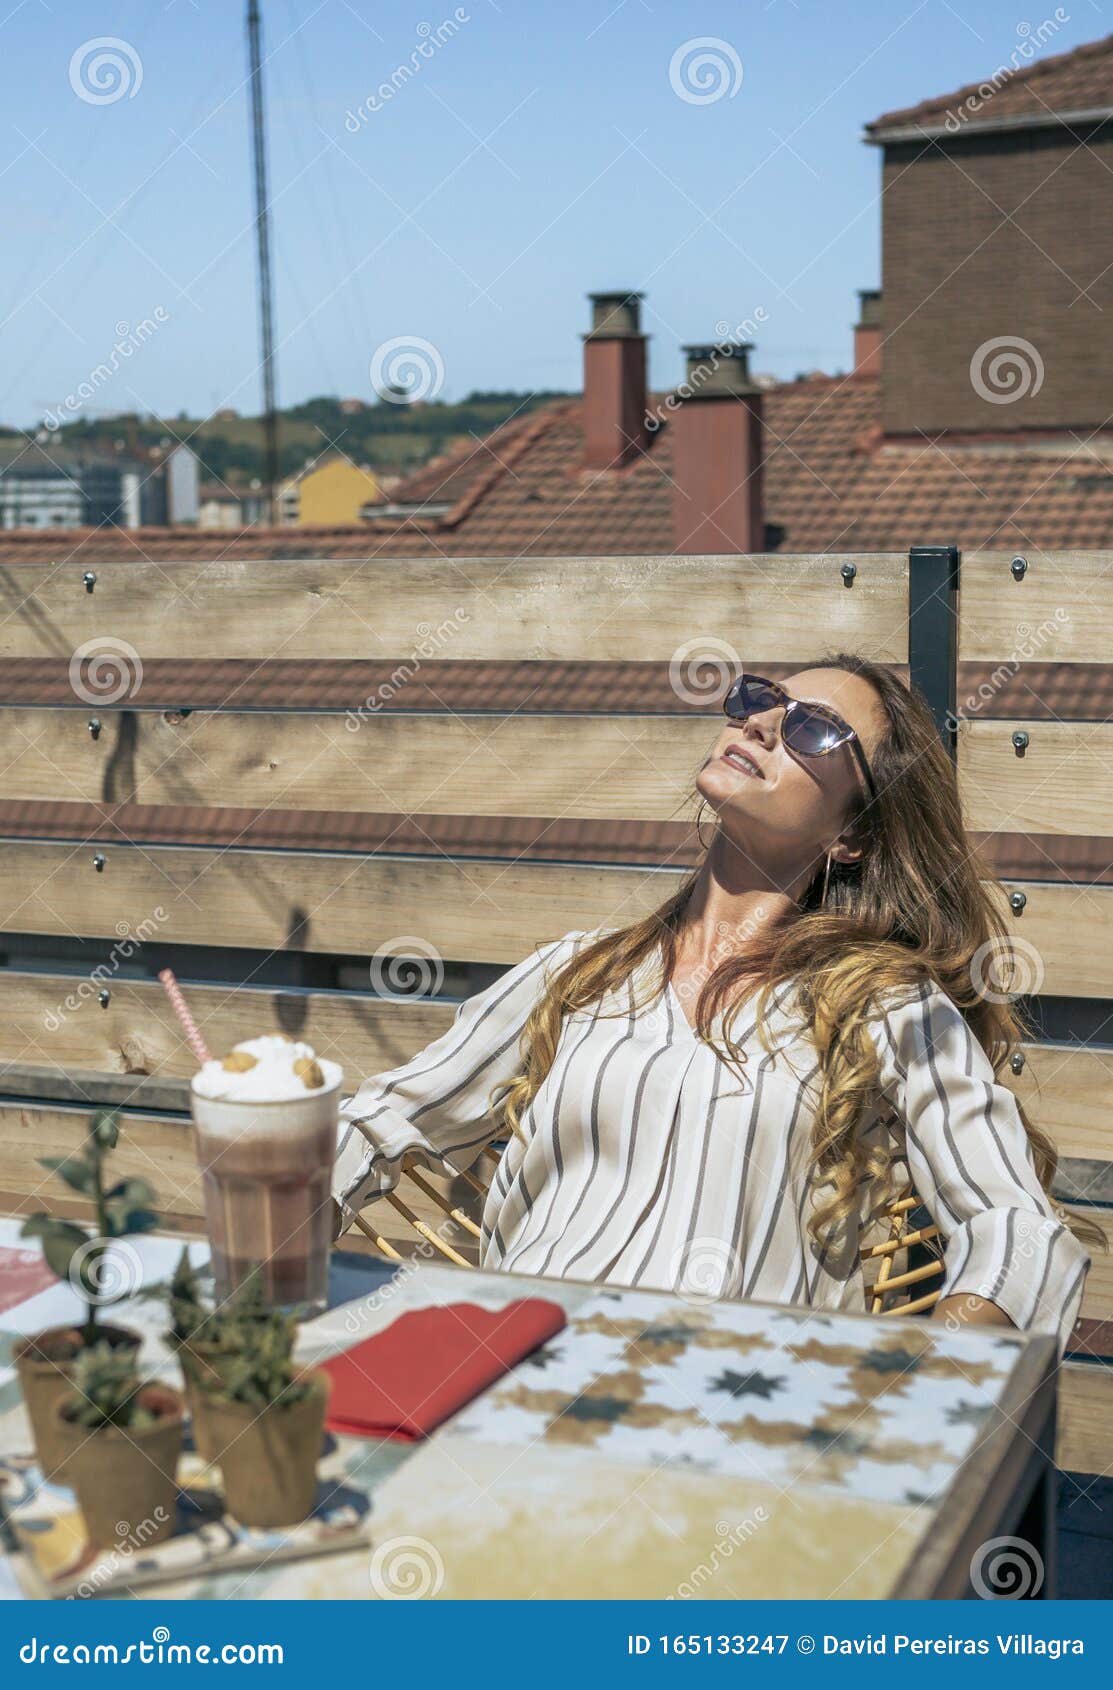 Woman With Sunglasses Sunbathing On The Terrace Stock Image Image Of